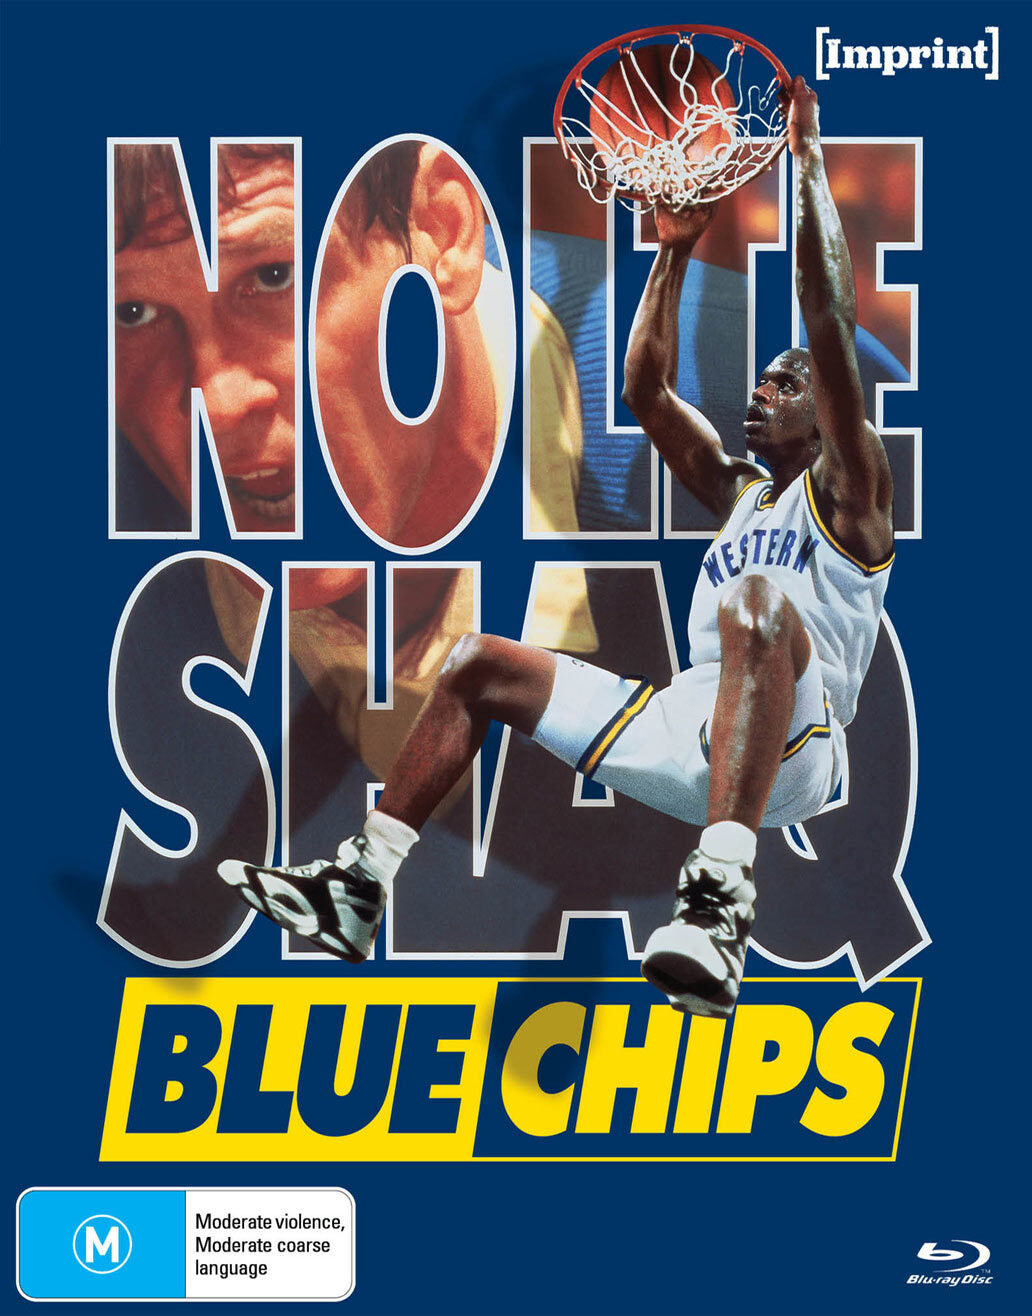 BLUE CHIPS (REGION FREE IMPORT - LIMITED EDITION) BLU-RAY